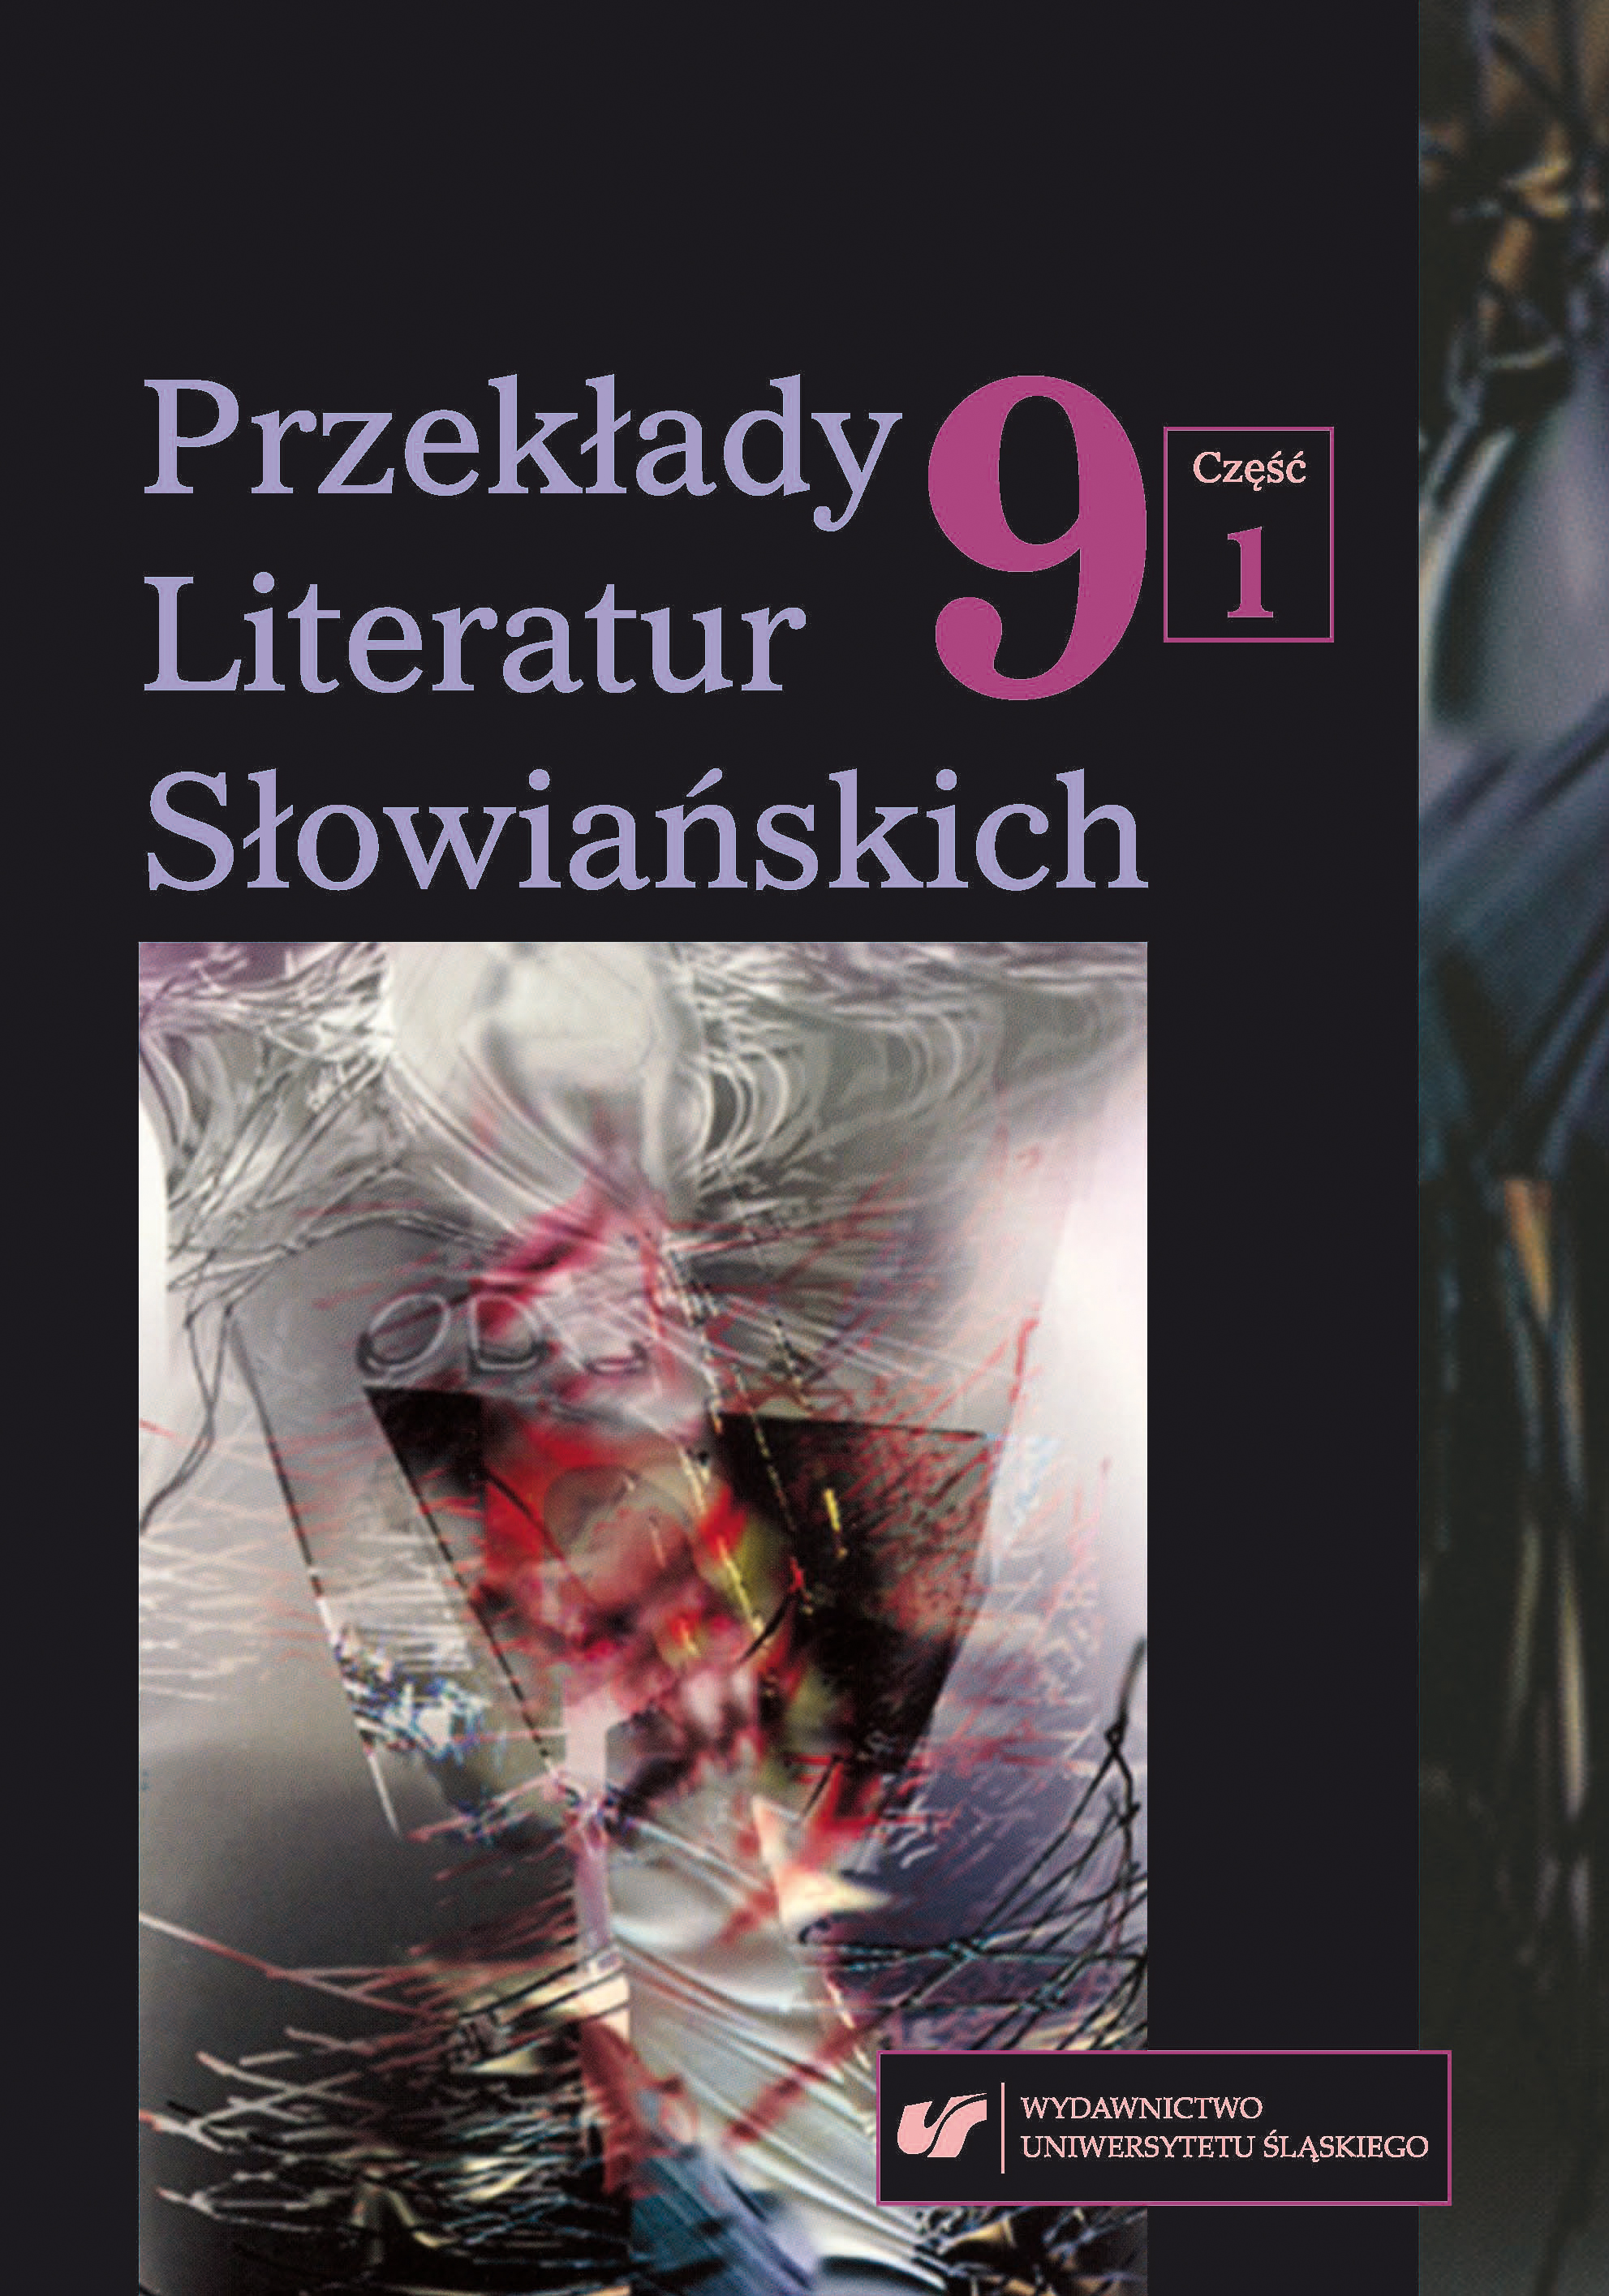 In-between Translation, Commentary and Interpretation — Remarks on the Margins of an English-Language History of Polish Literature